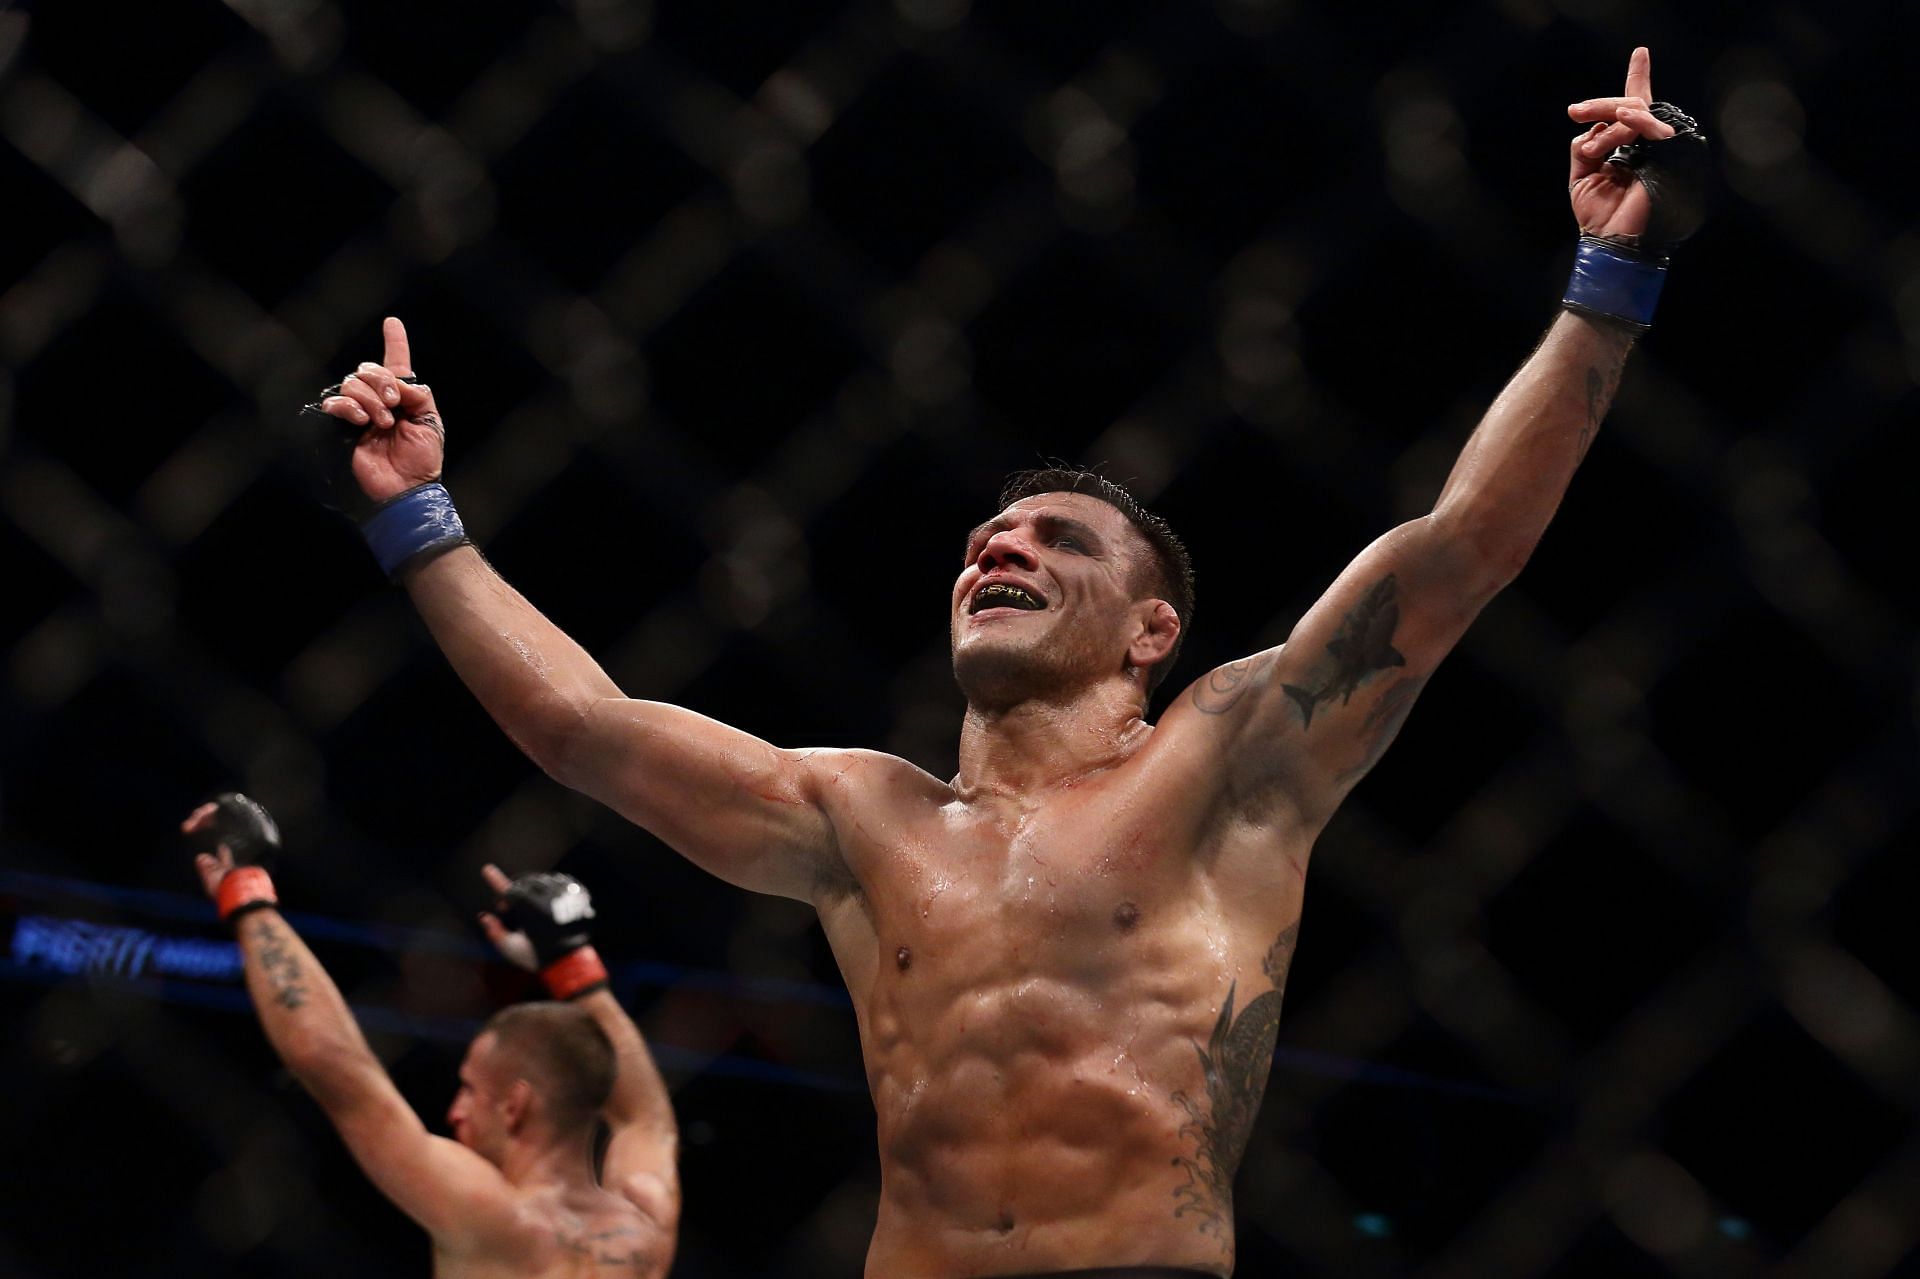 Rafael Dos Anjos became a champion - and avoided being a highlight reel victim in the process